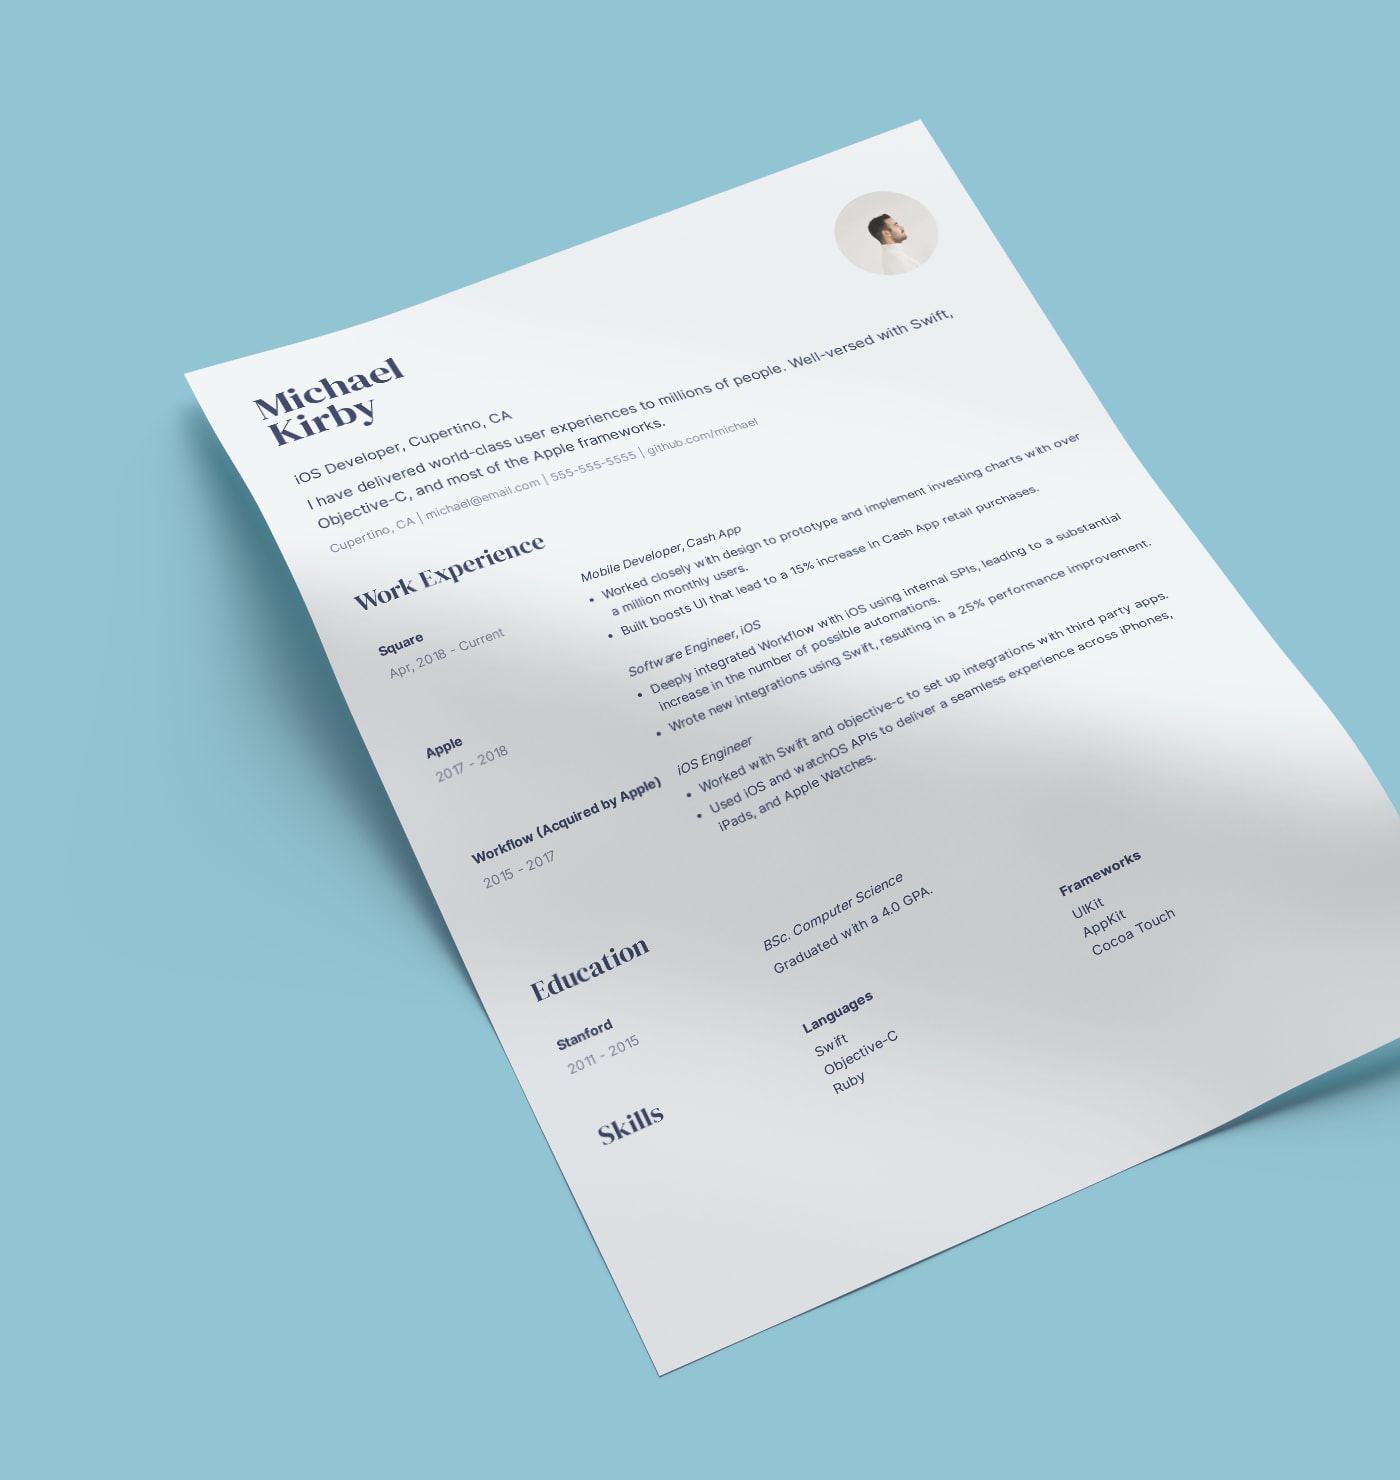 Seymore creative resume template made with Standard Resume builder.